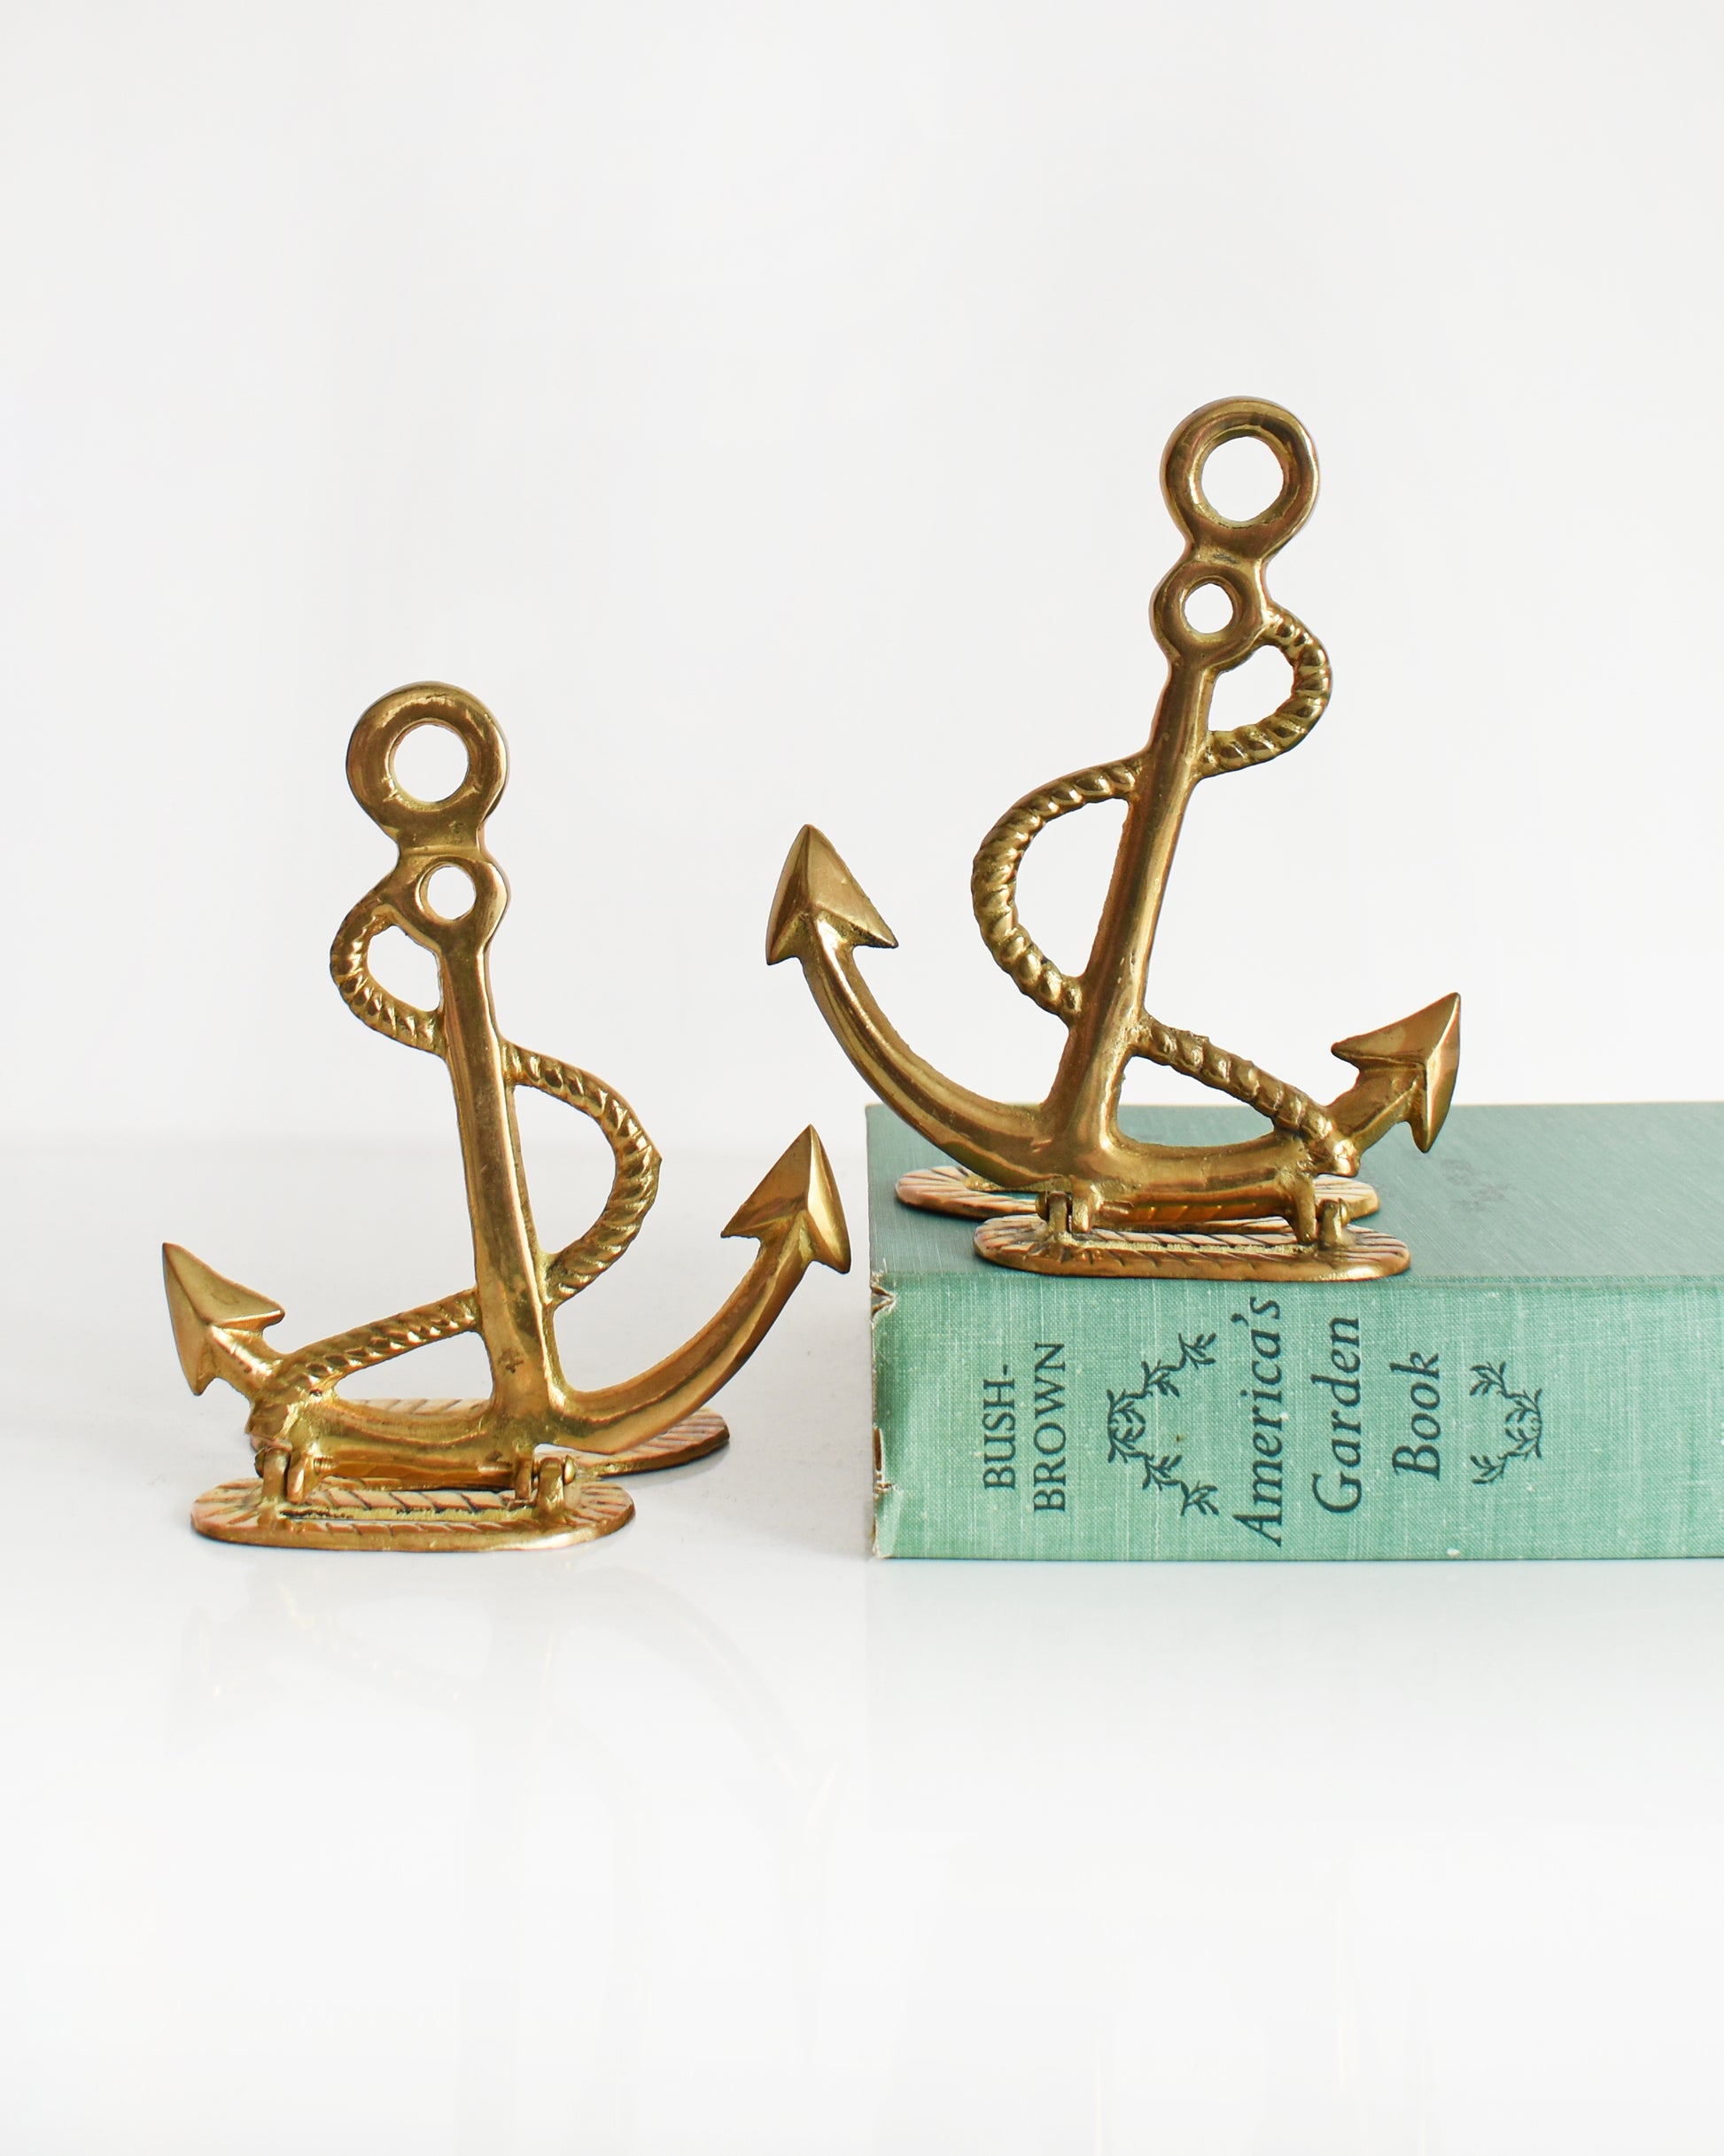 Two vintage brass anchor and rope bookends. One of the bookends is on a green book